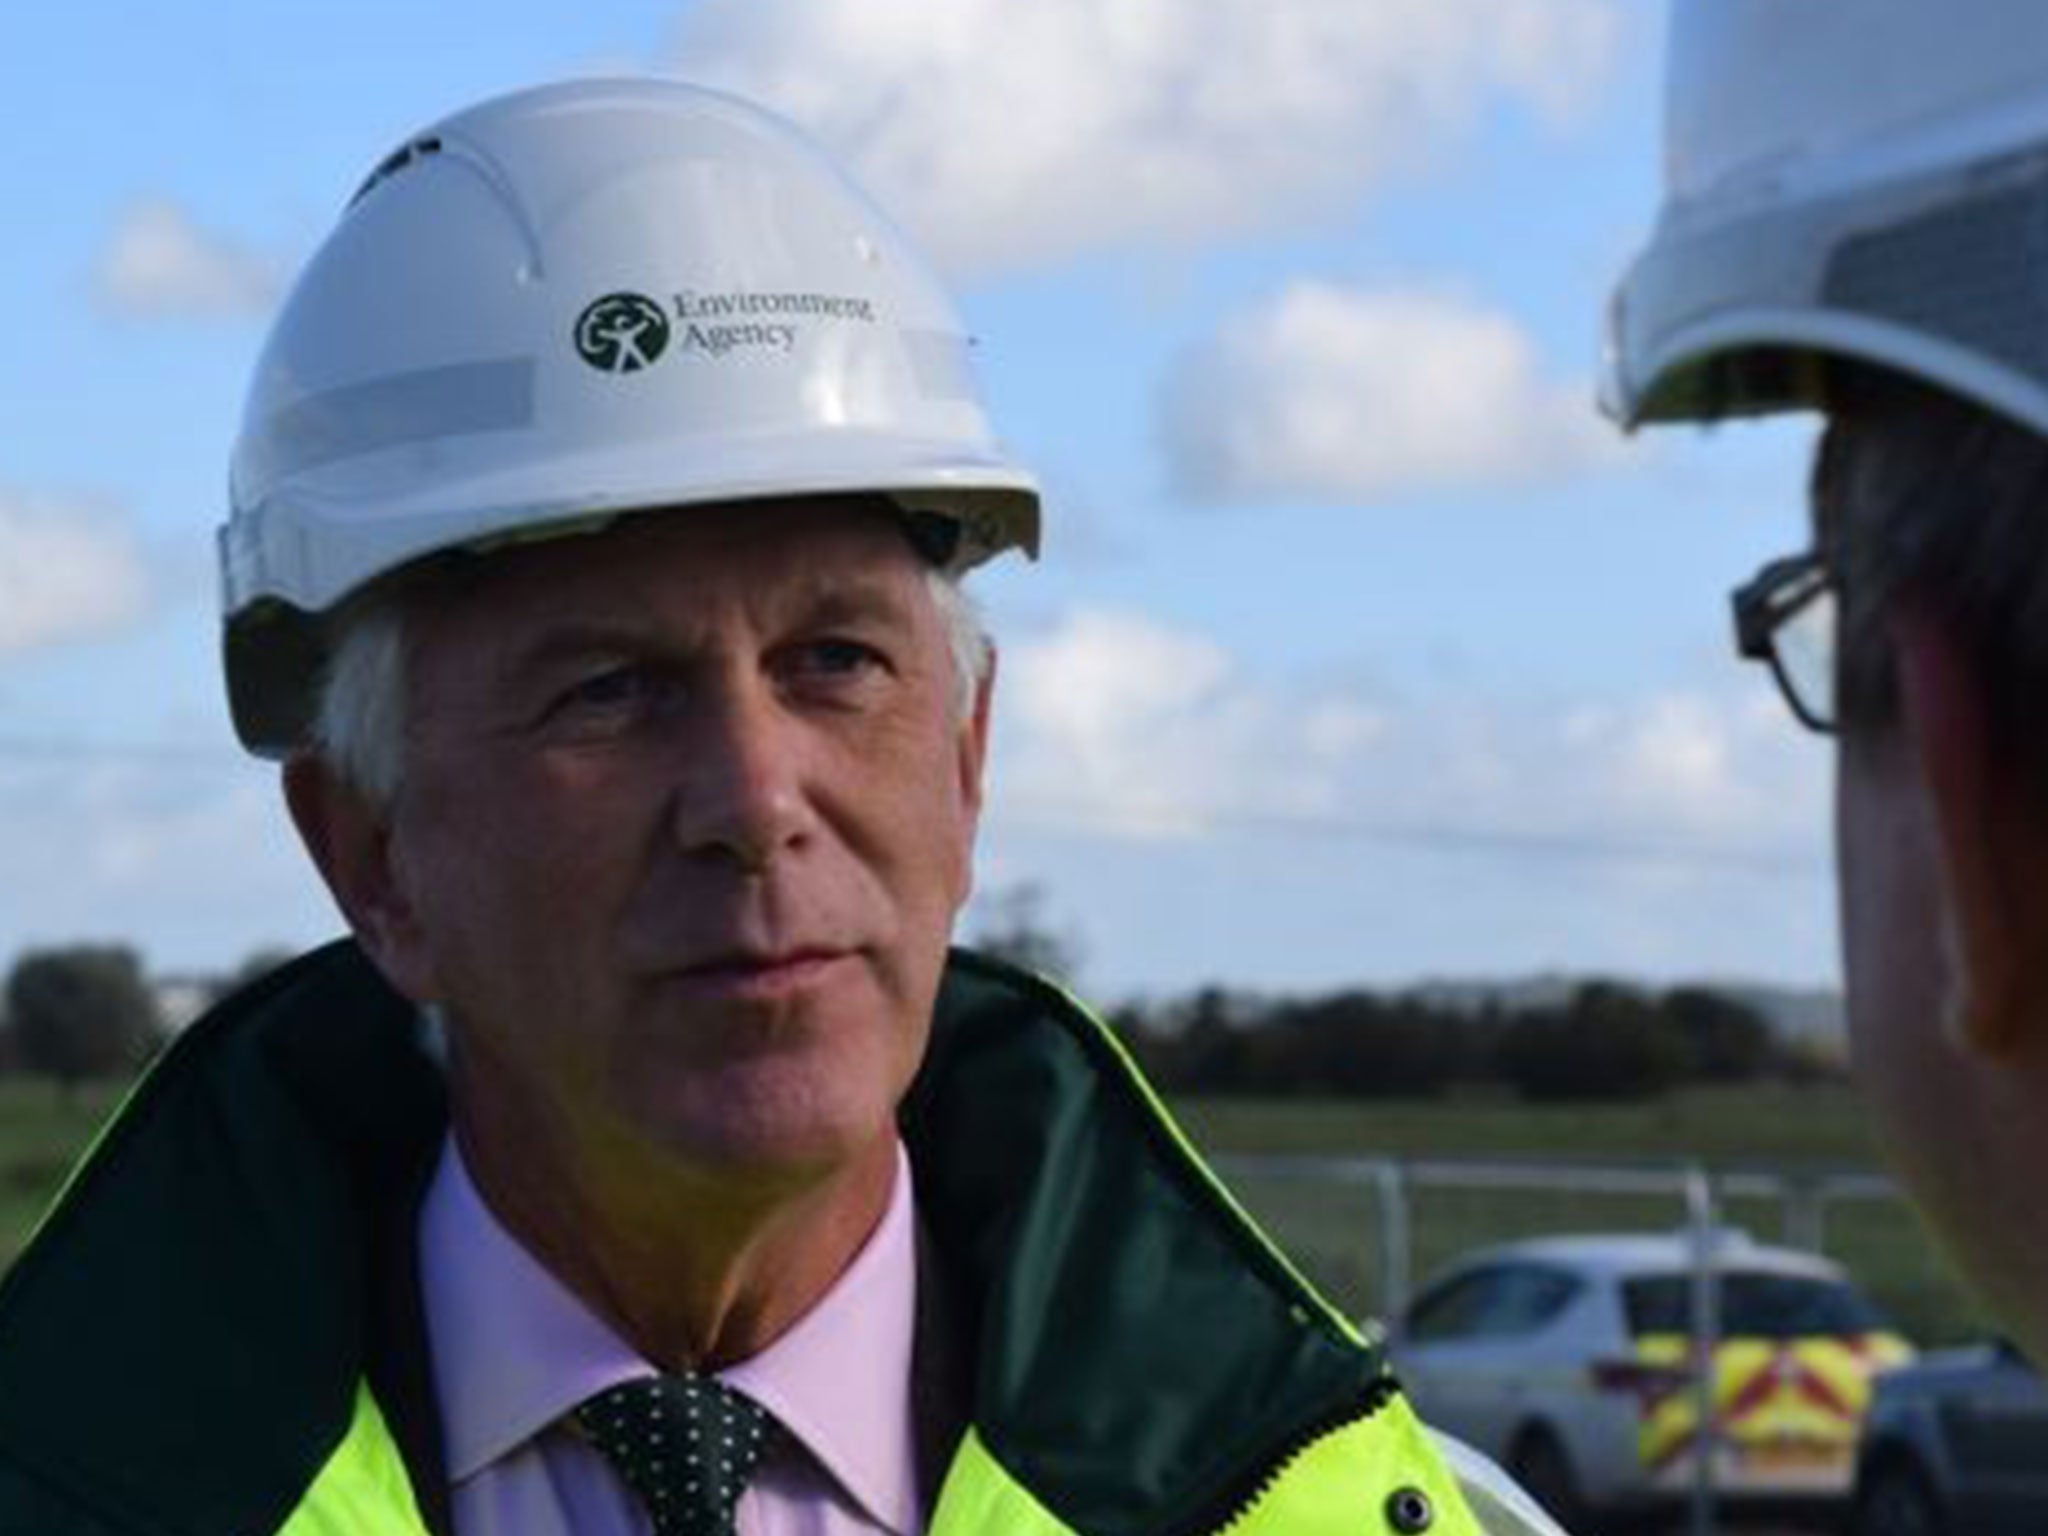 Philip Dilley, the Environment Agency’s new chairman